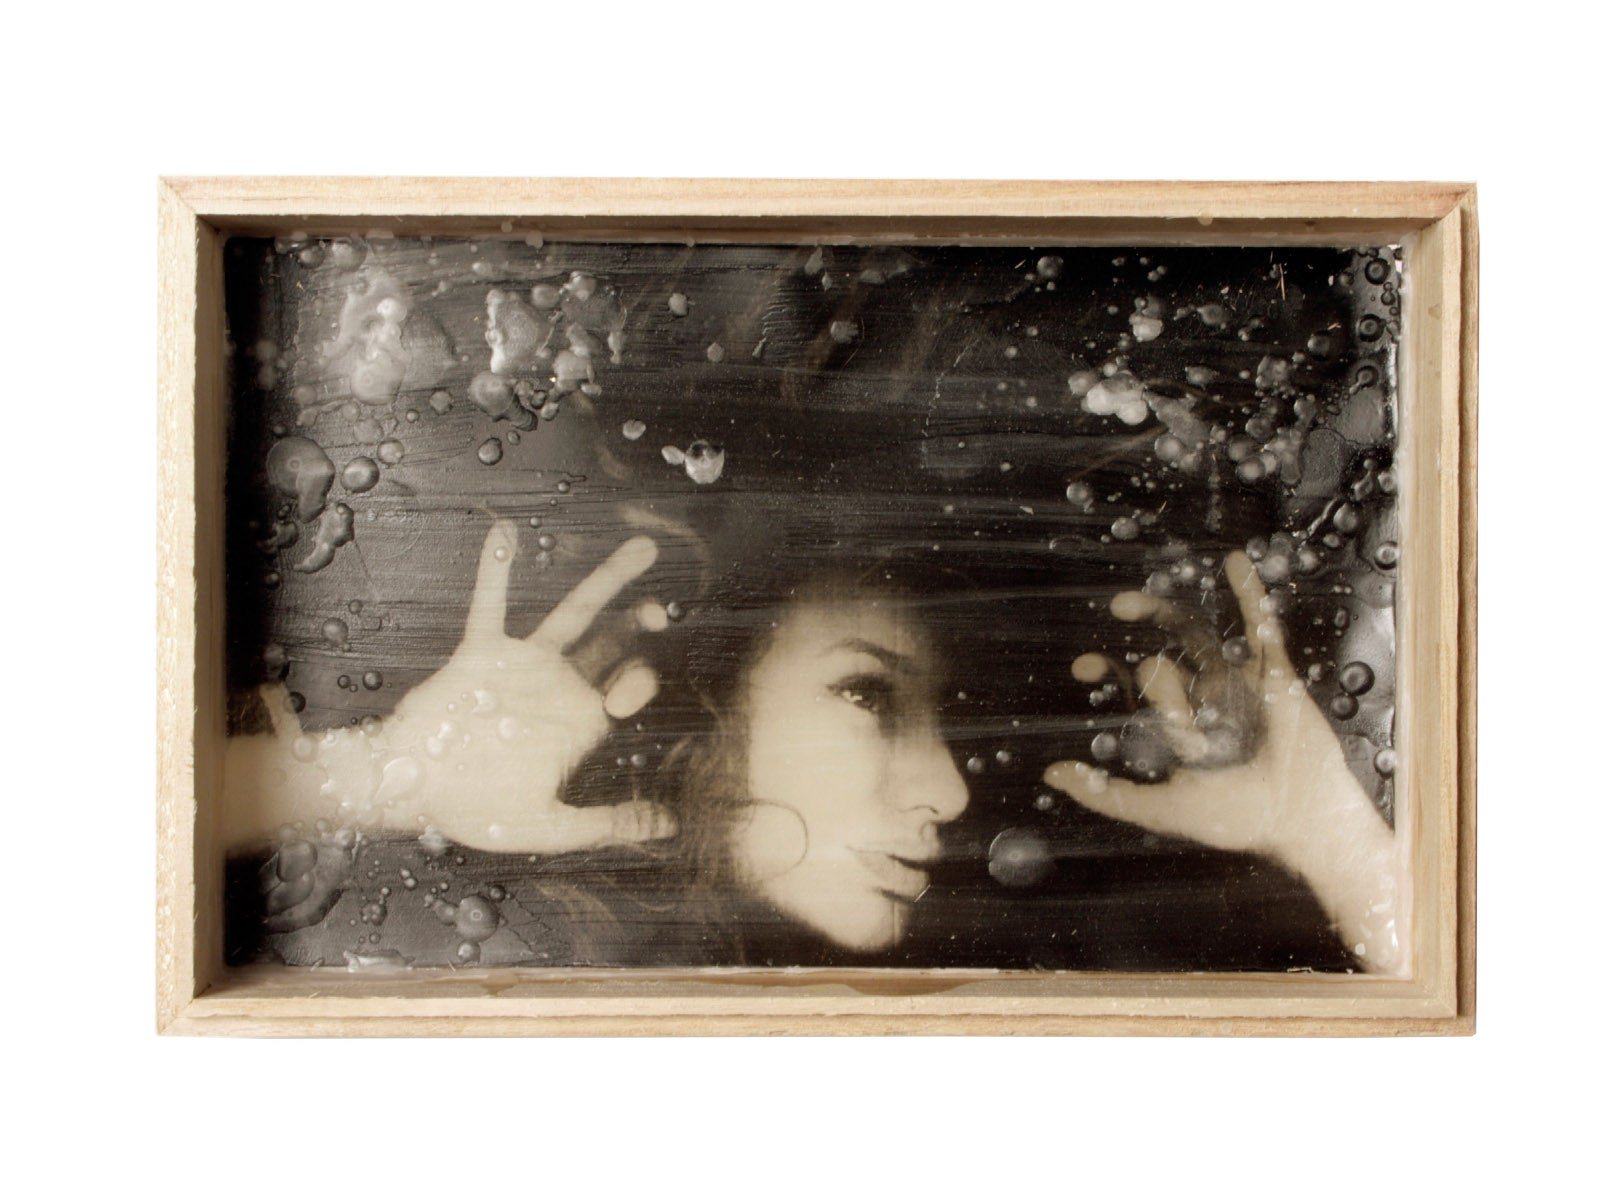 A framed artwork of a photograph/drawing of a girl underwater, the bubbles are represented with melted wax ontop of the image.